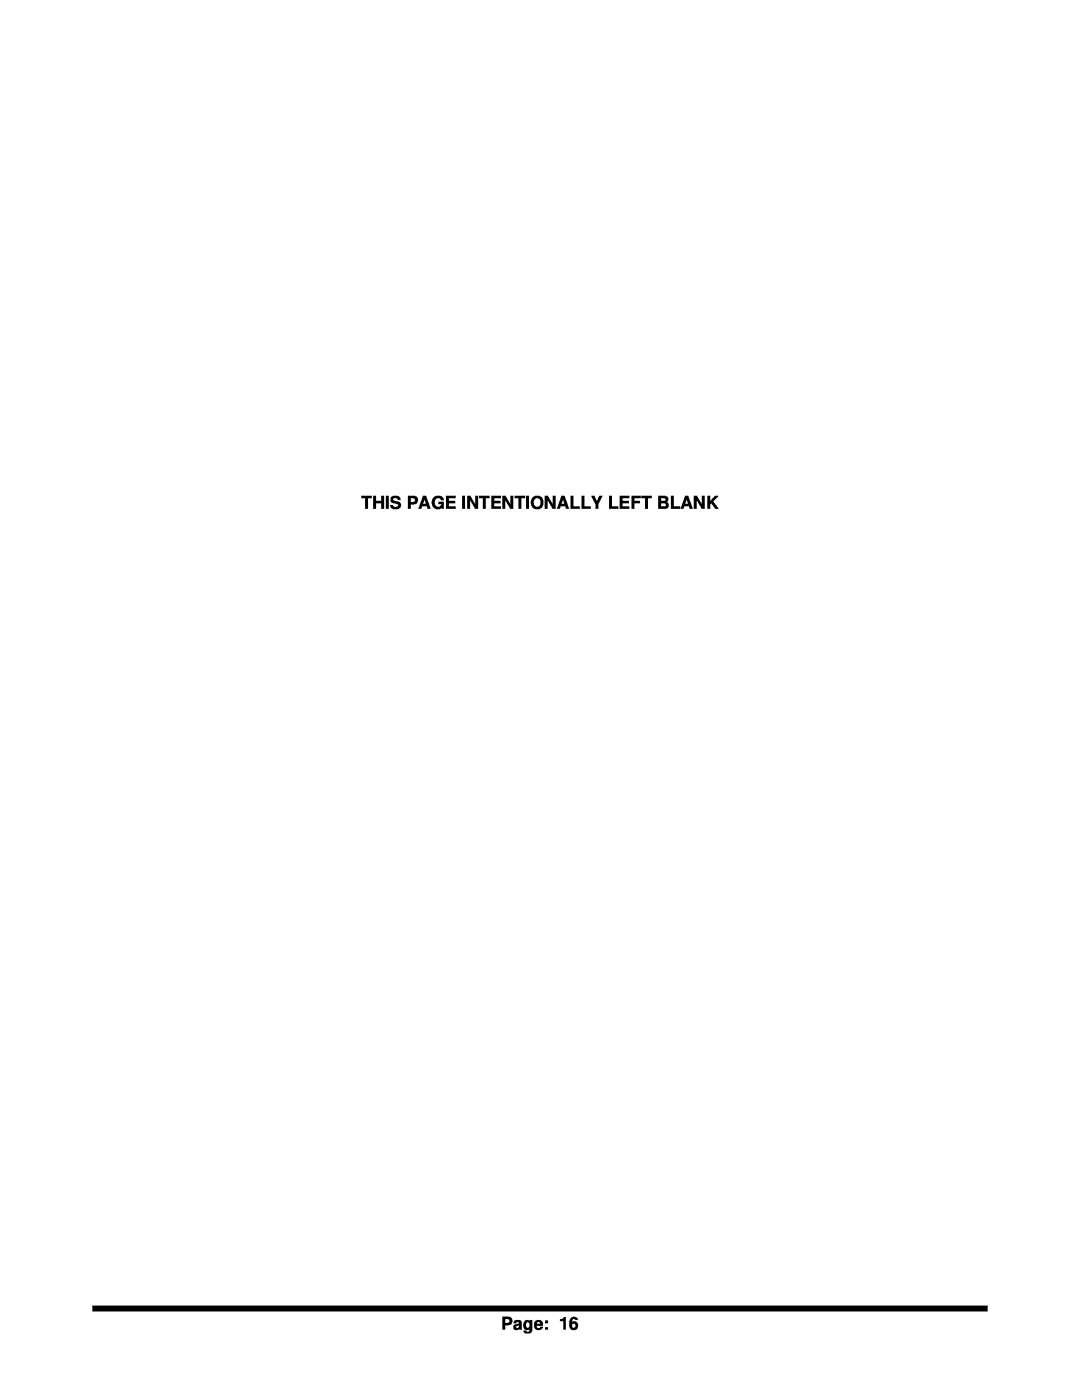 Sierra Monitor Corporation T12020, 5100-06-IT, 5100-05-IT, 5100-04-IT, 5100-03-IT THIS PAGE INTENTIONALLY LEFT BLANK Page 